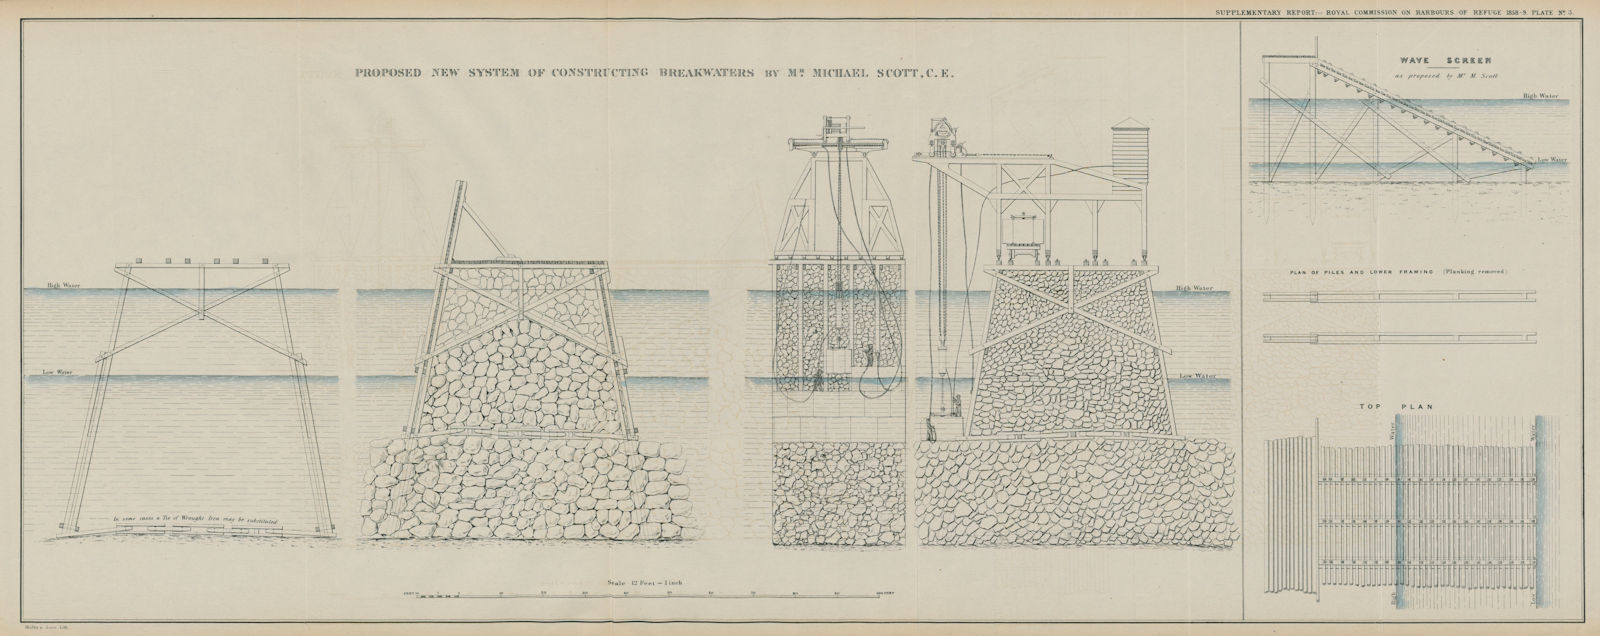 Proposed New System of Constructing Breakwaters by Mr Michael Scott 1859 print